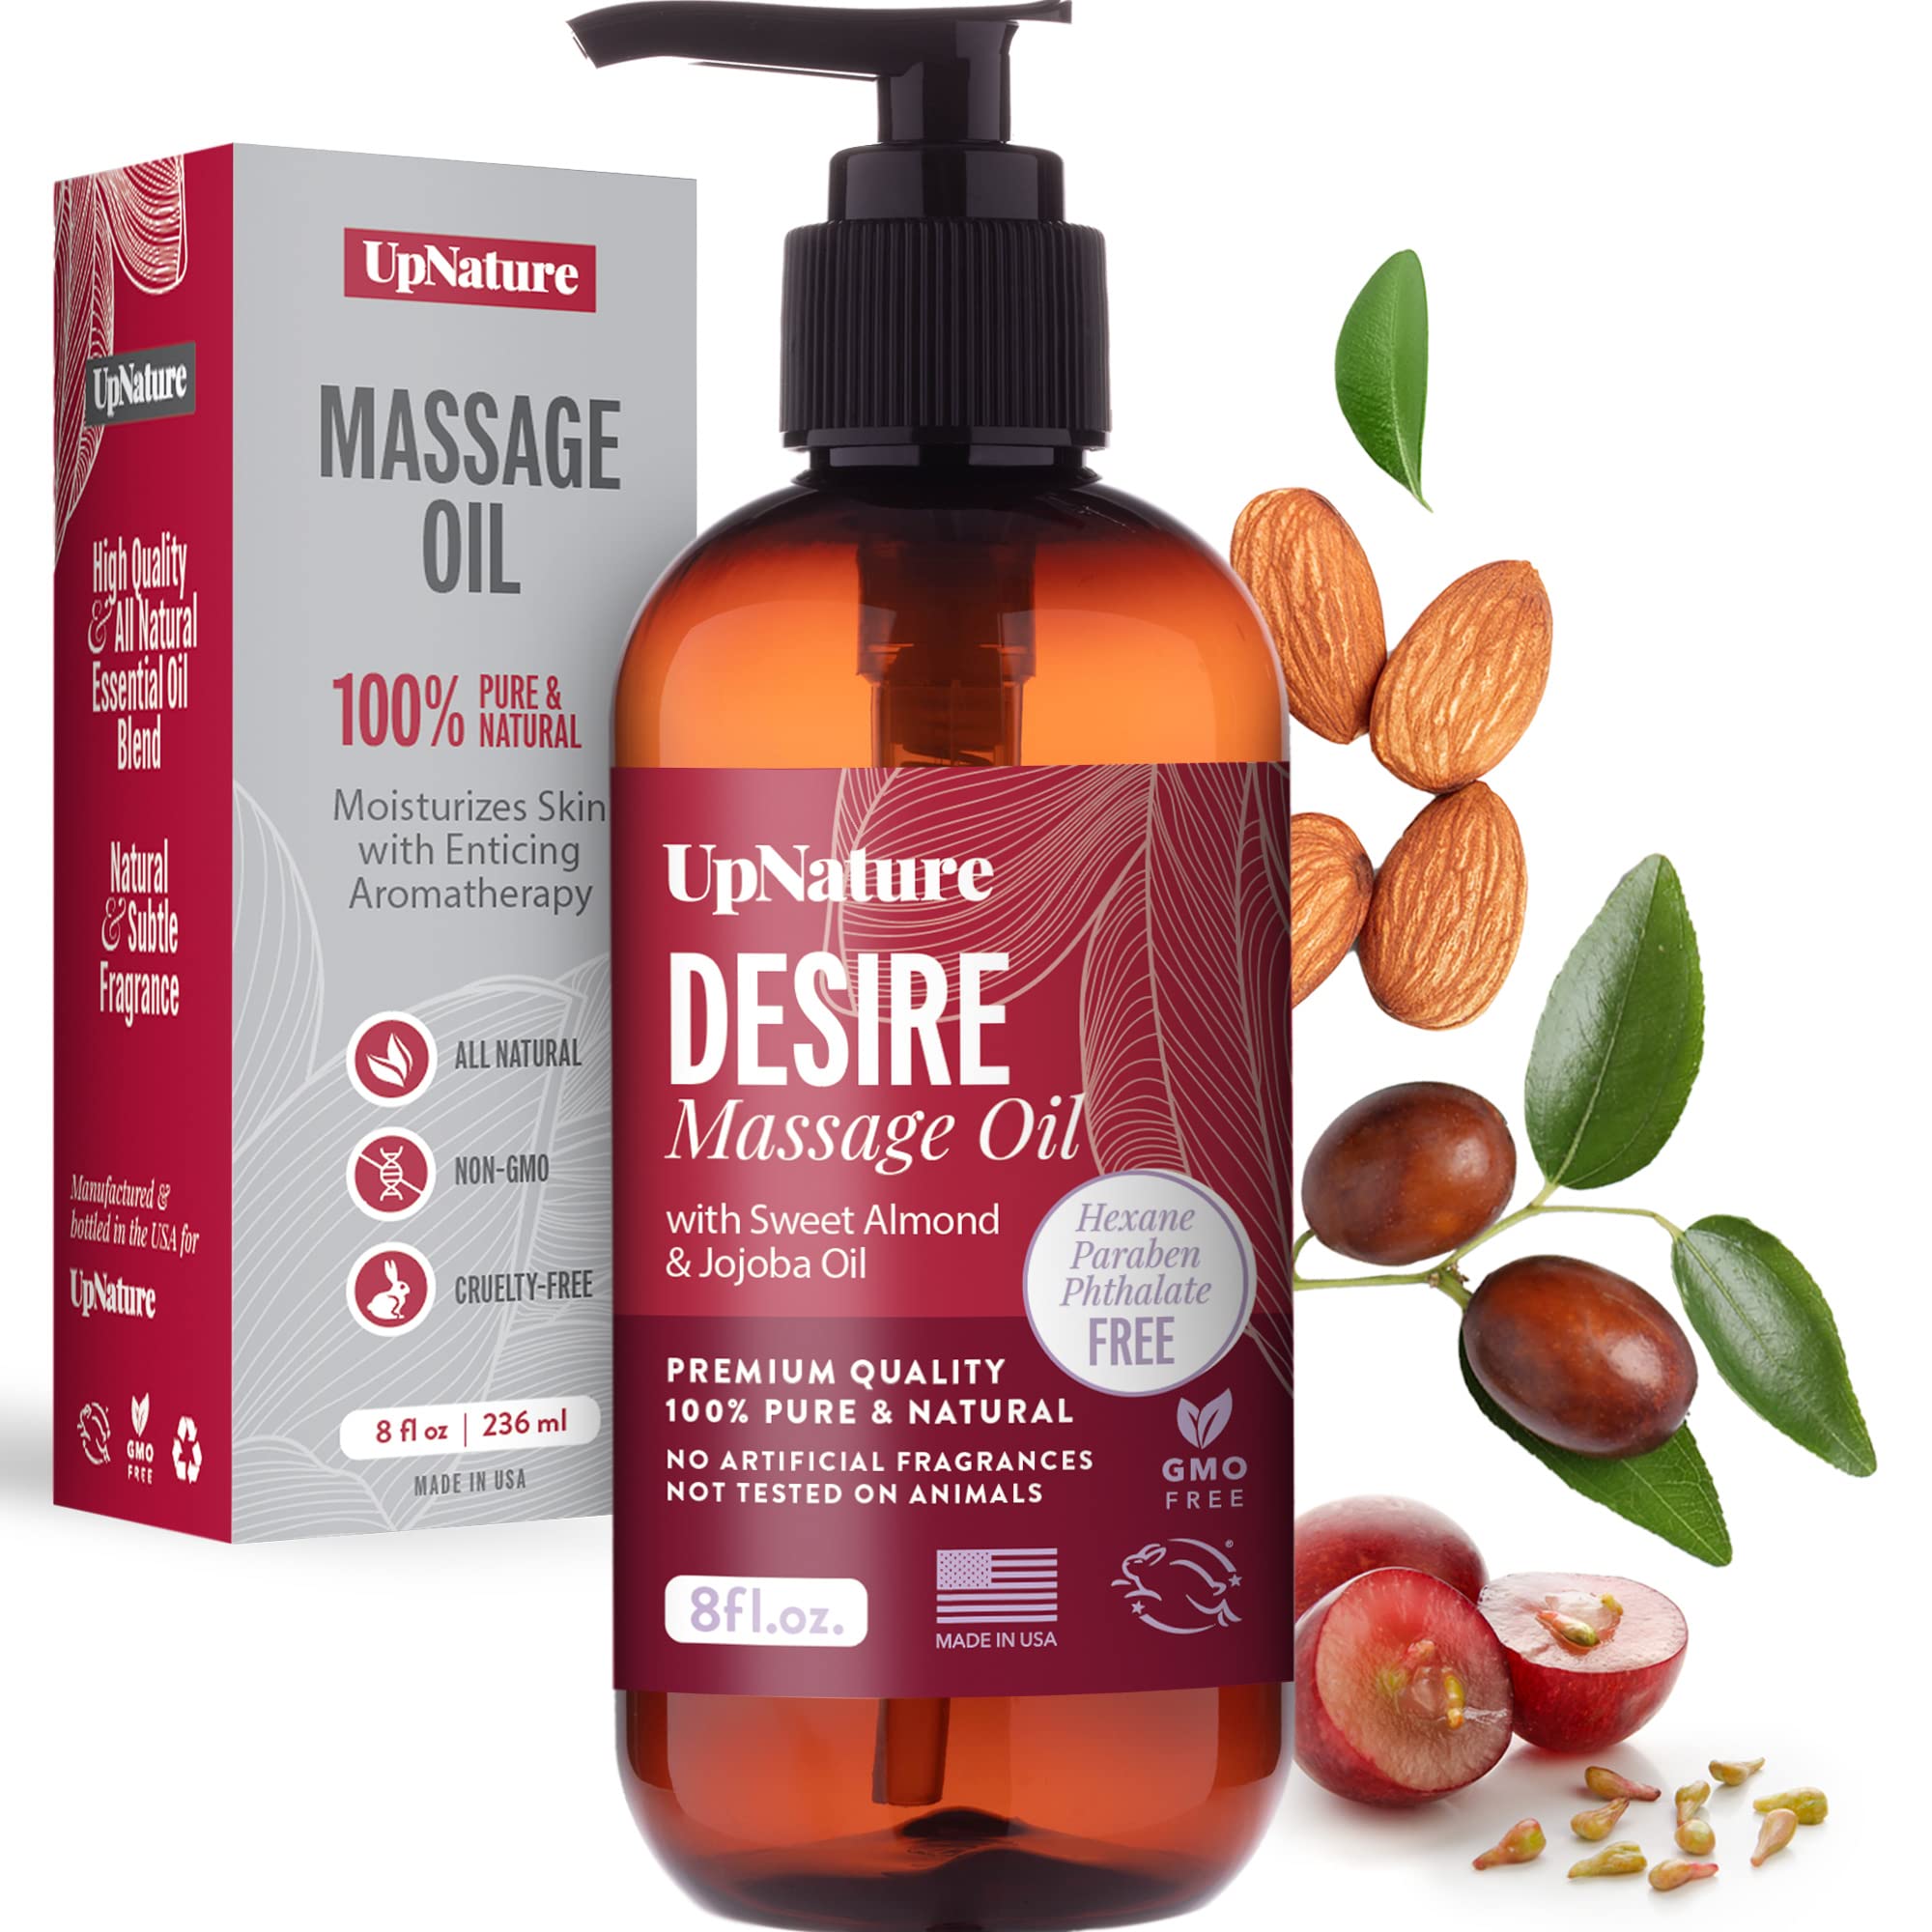 Desire Massage Oils for Date Night - Sensual Massage Oil - Valentines Day Gifts for Him and Her - Wife and Husband Valentine's Day Gifts - Massage Oil for Couples - Have a Relax & Fun Date Night!